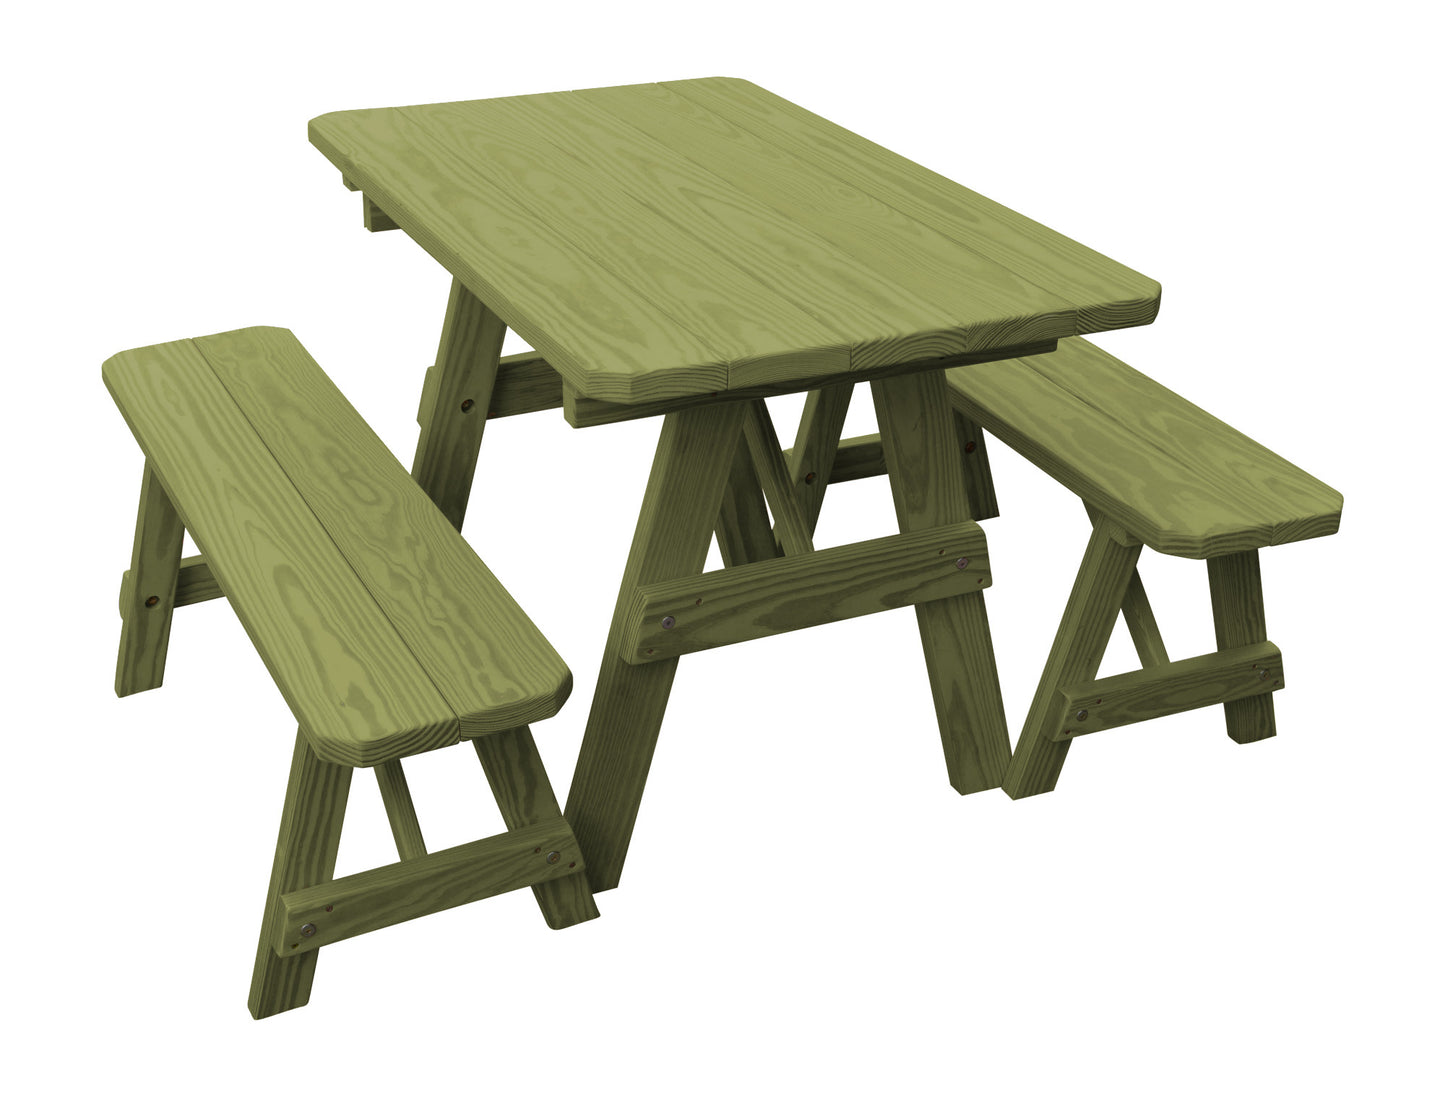 A&L Furniture Co. Yellow Pine Traditional 4' Table with 2 Benches - LEAD TIME TO SHIP 10 BUSINESS DAYS